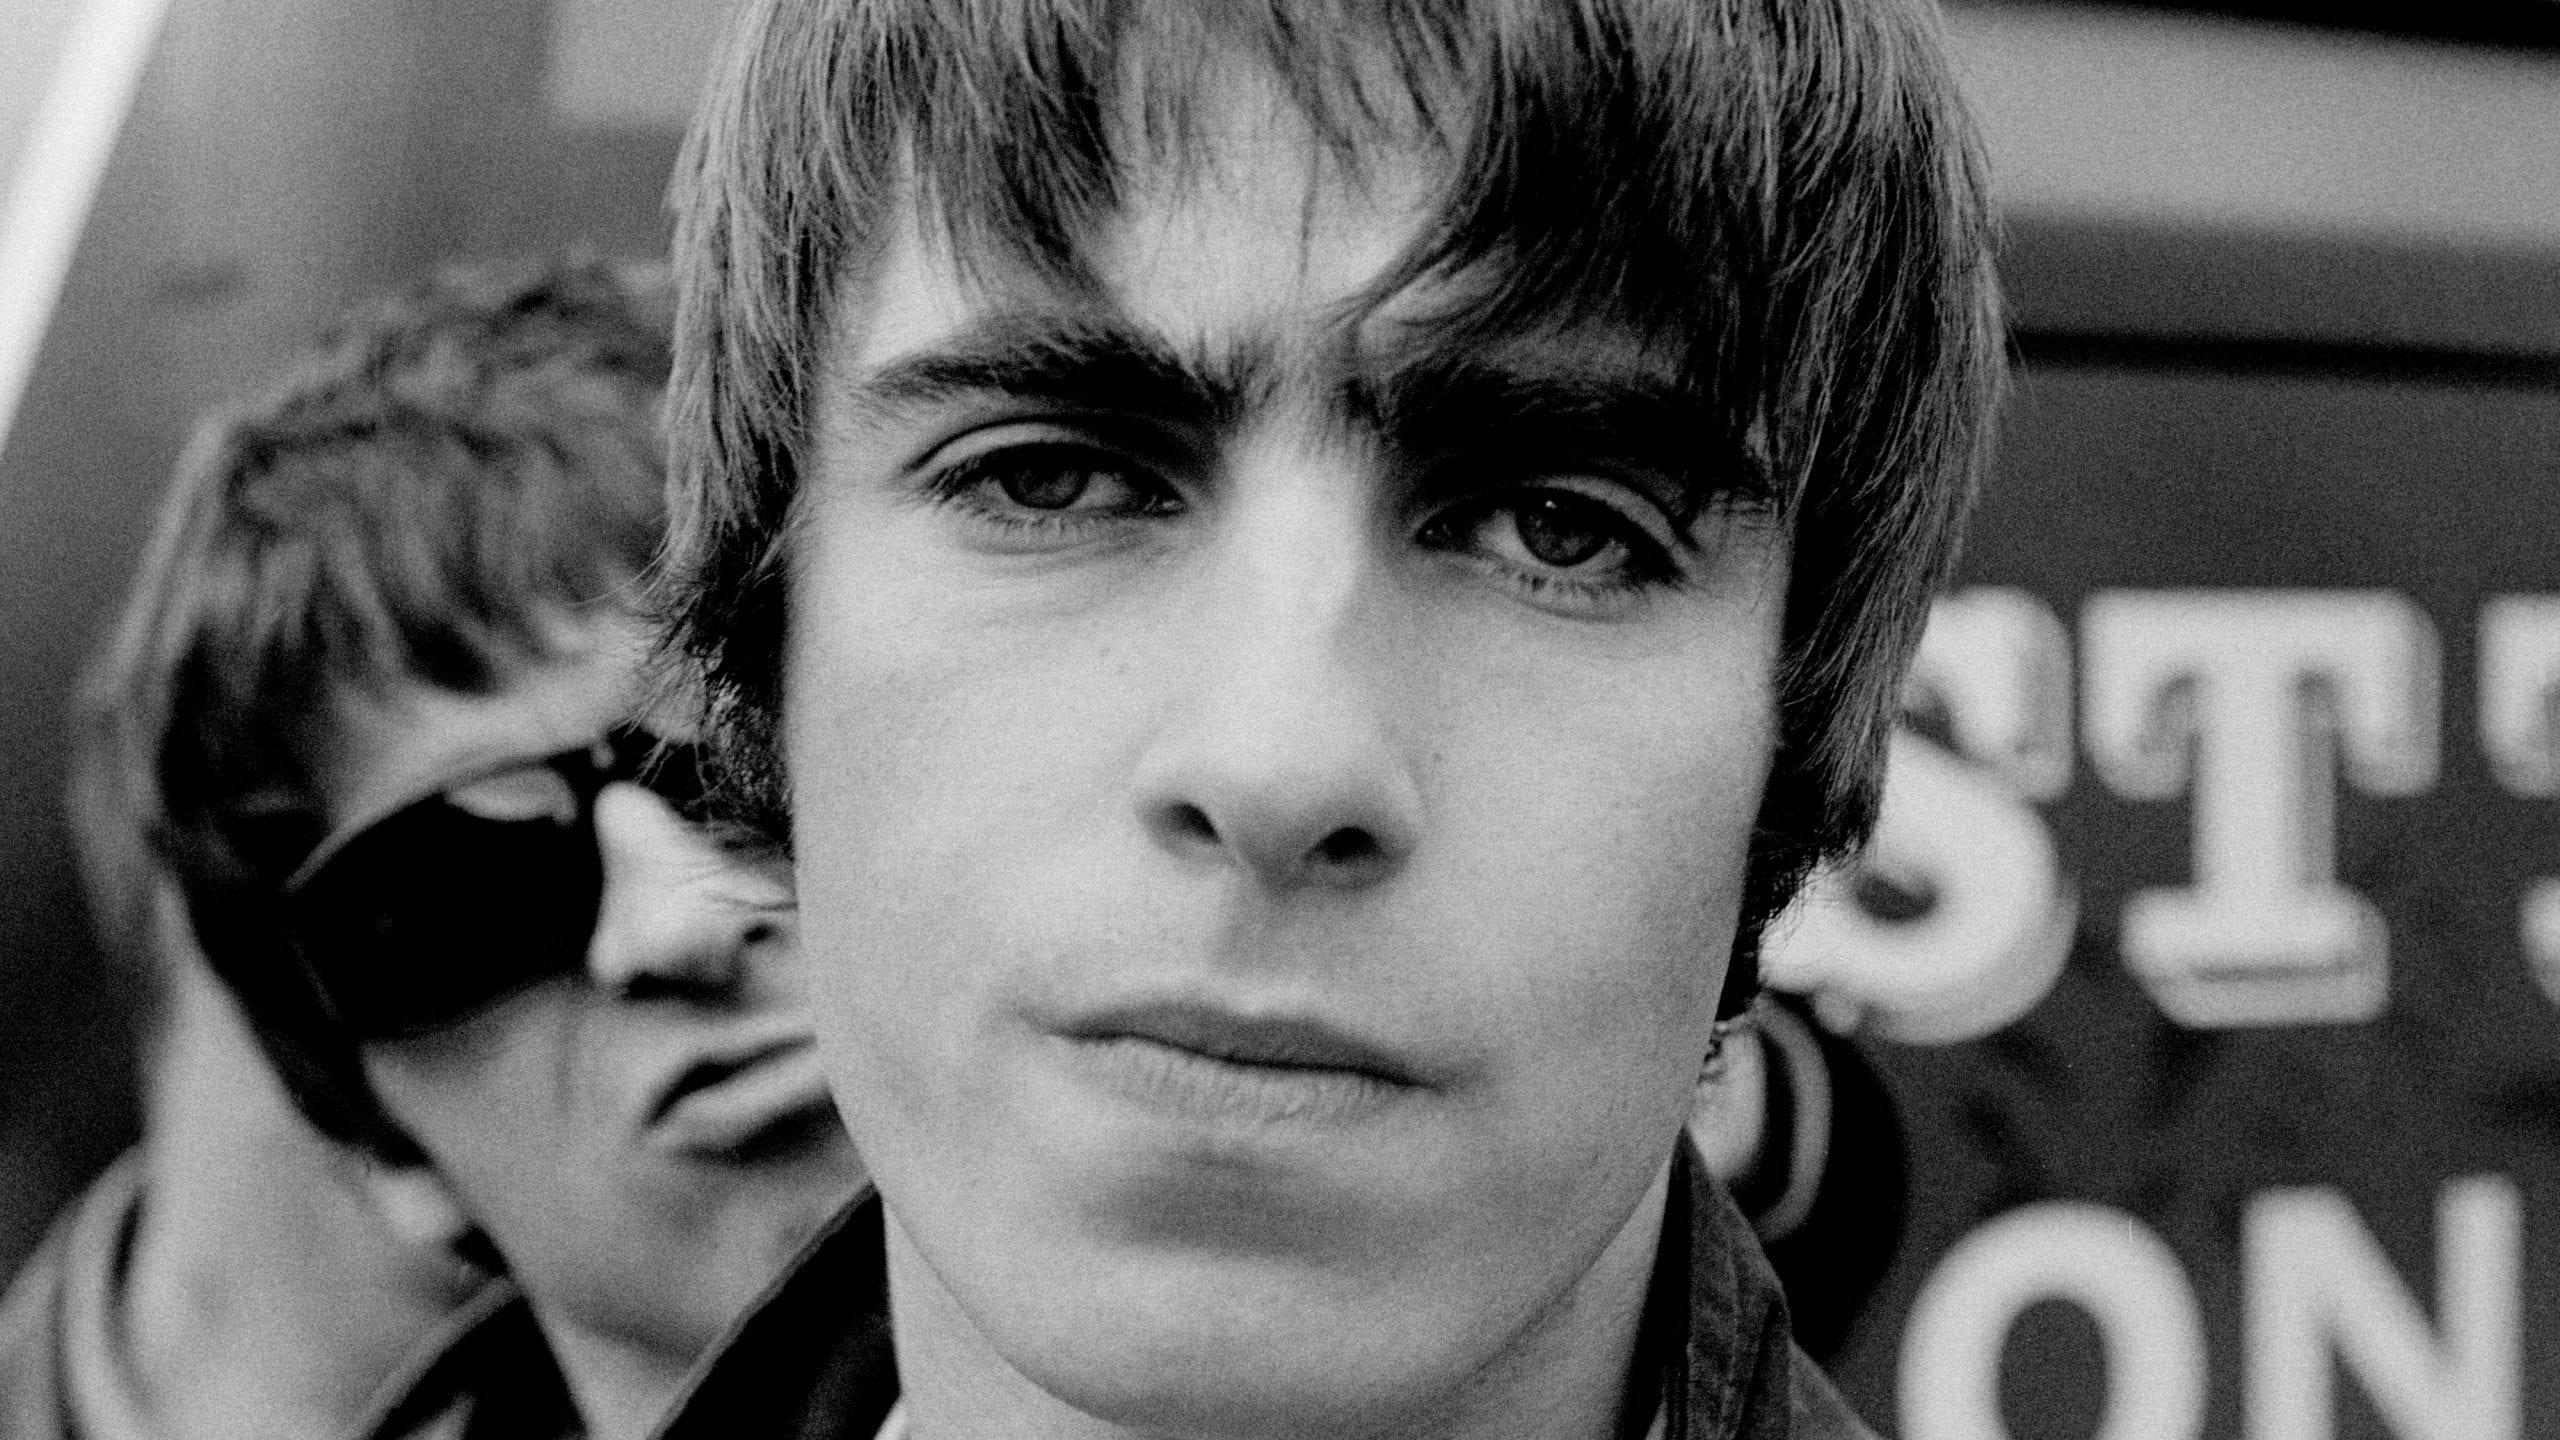 Liam Gallagher Net Worth in 2021, How Much Did The Oasis Lead Singer Make?